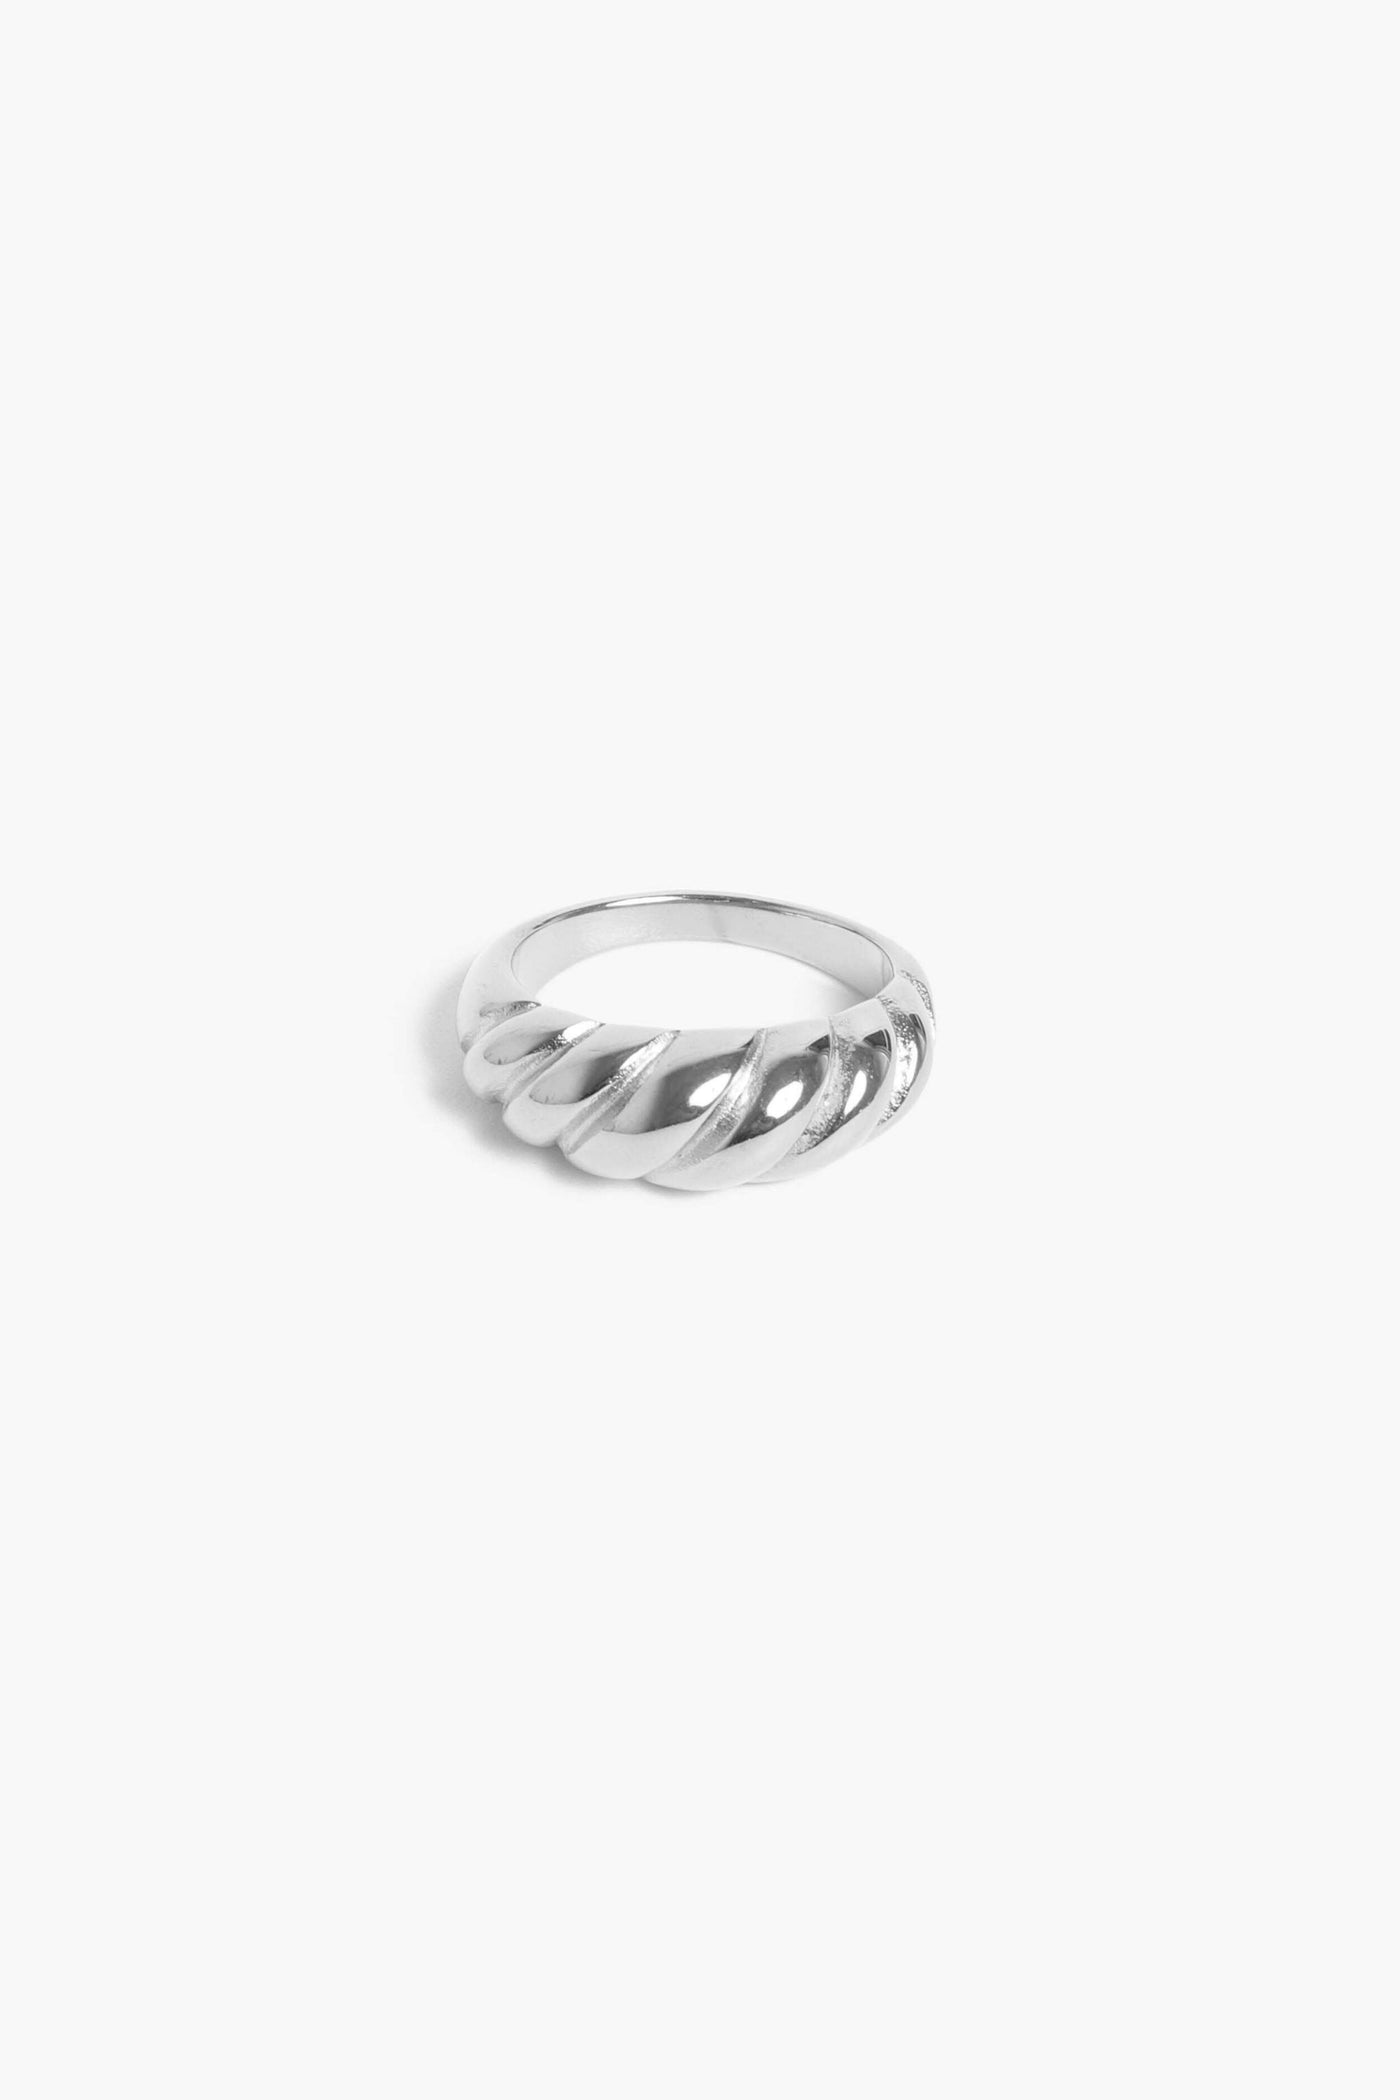 Marrin Costello Jewelry Rita Ring croissant crescent classic statement ring. Available in sizes 6, 7, 8. Waterproof, sustainable, hypoallergenic. Polished stainless steel.